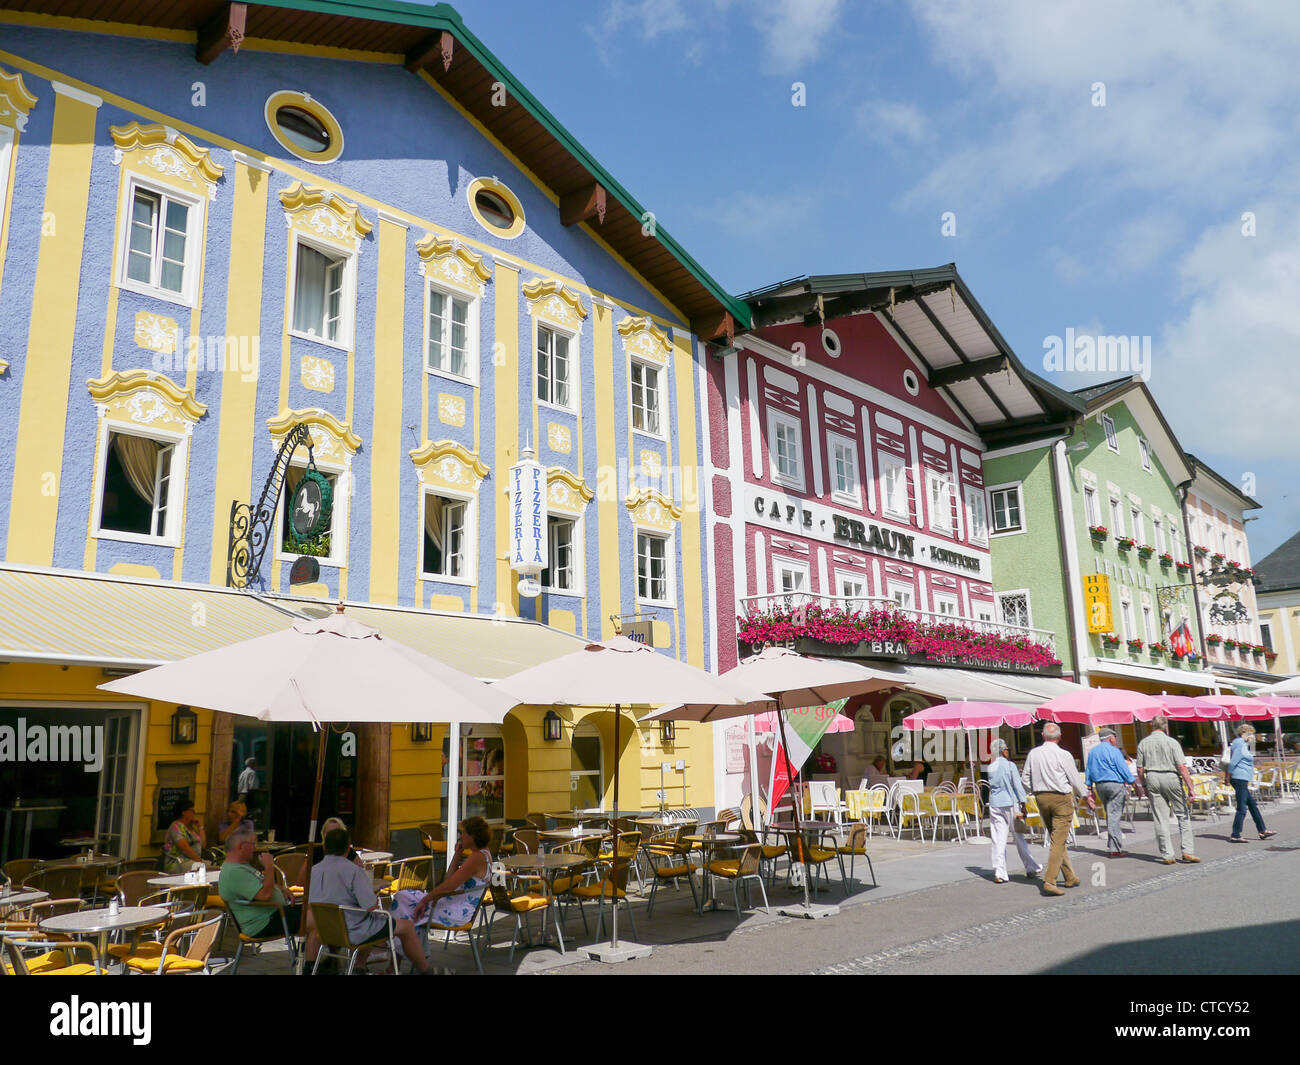 Restaurants and cafes in the village centre of Mondee, a charming town in the Austrian Salzkammergut Lake district, Austria Stock Photo